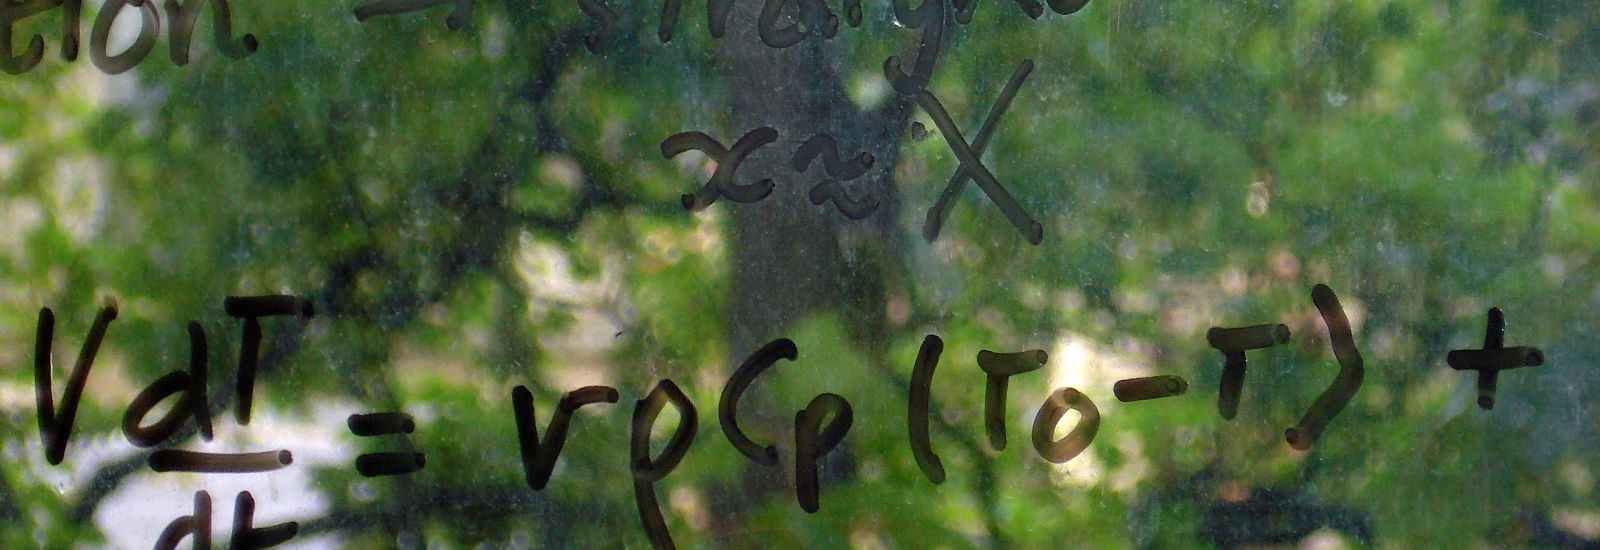 Maths formulae written on glass with trees behind